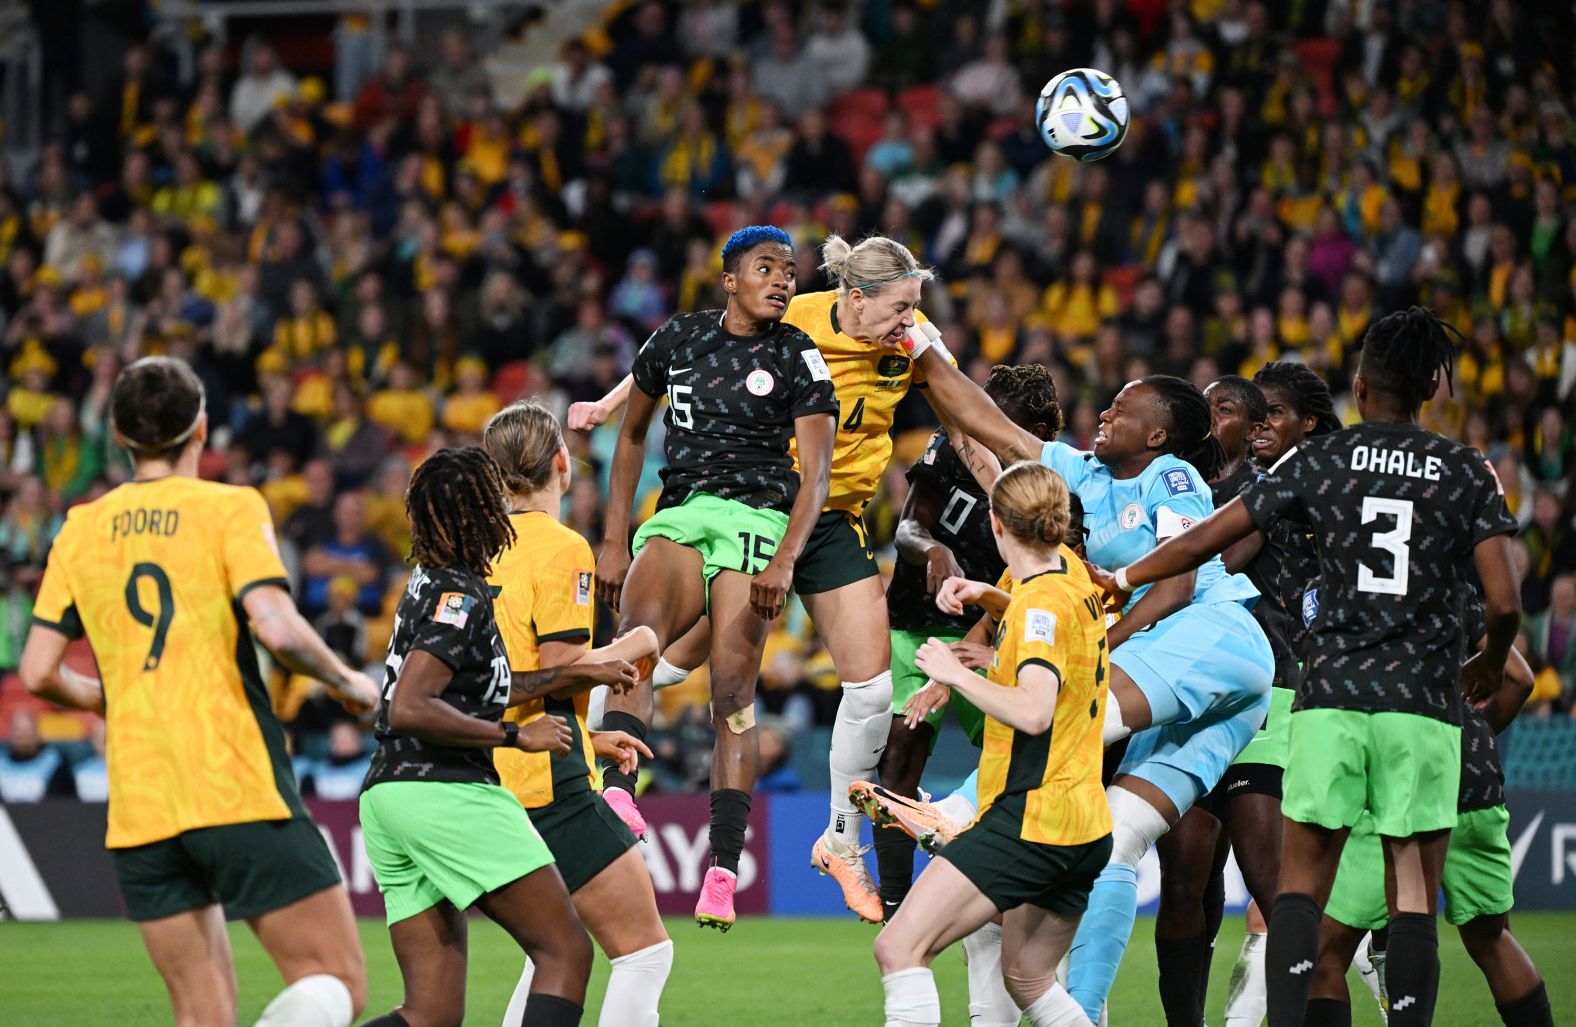 Players from Australia and Nigeria compete for a ball in the air on July 27.